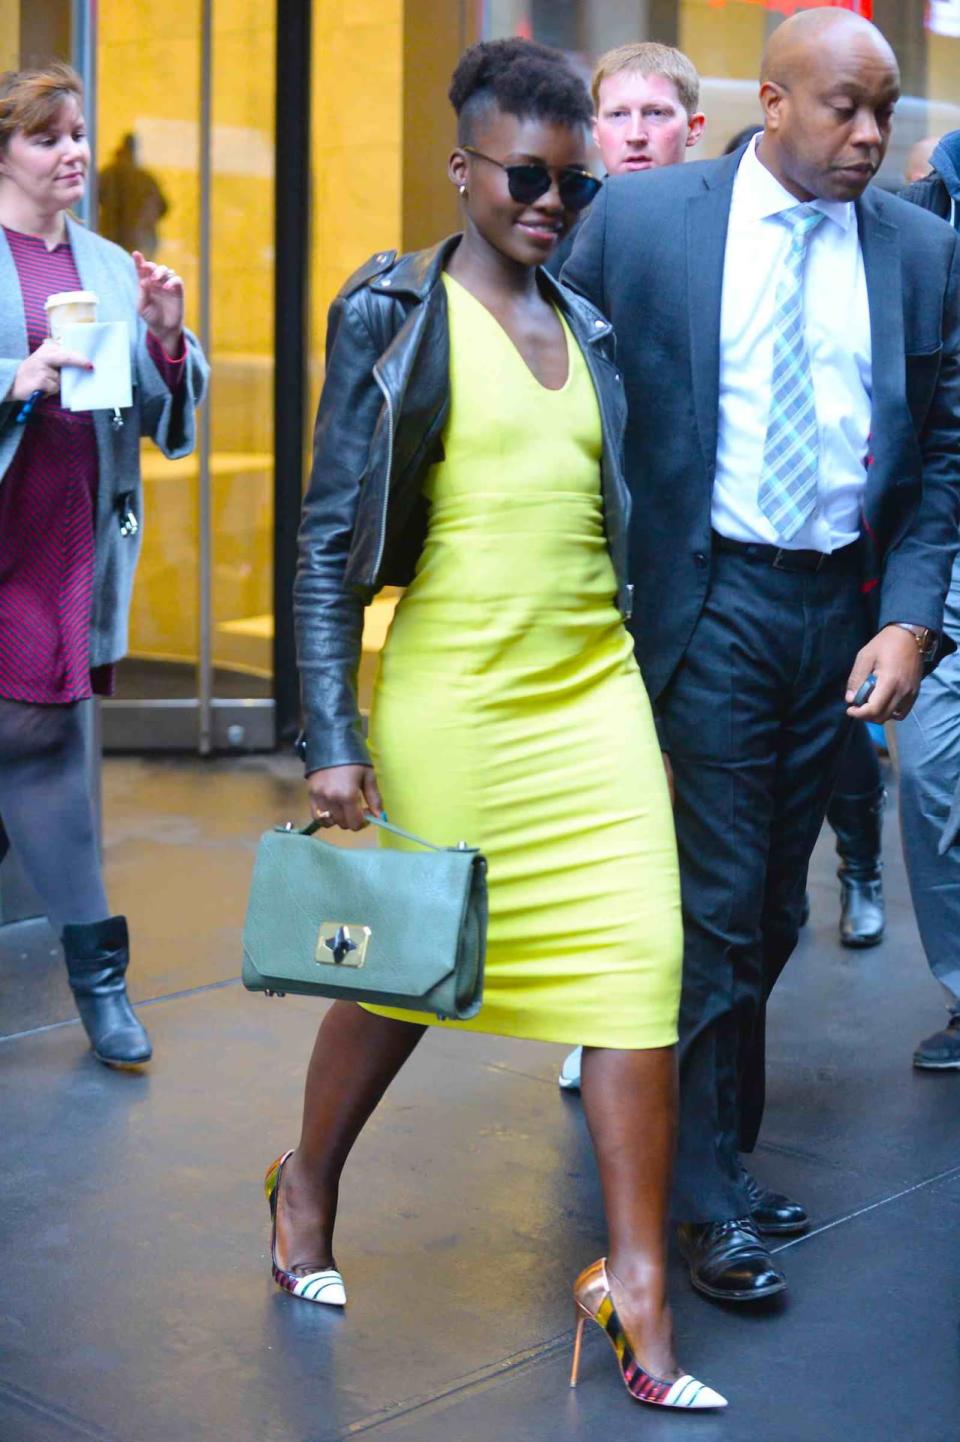 Resolution Four: Seriously consider investment pieces, a la Lupita Nyong'o. We’ll never be as elegantly cool as Lupita Nyong'o, but we can steal one of her style tricks immediately: Mixing well-made basics with trendier items. When she topped a yellow silk dress with a black biker jacket last month in New York, threw a Rick Owens leather hoodie over airport pants in LA, and left her Broadway stage door in a deep green peacoat, she proved a few key pieces can pull a look together easily, effortlessly, and in a lasting (read: no more yearly coat shopping) way. Gracias, Lupita!